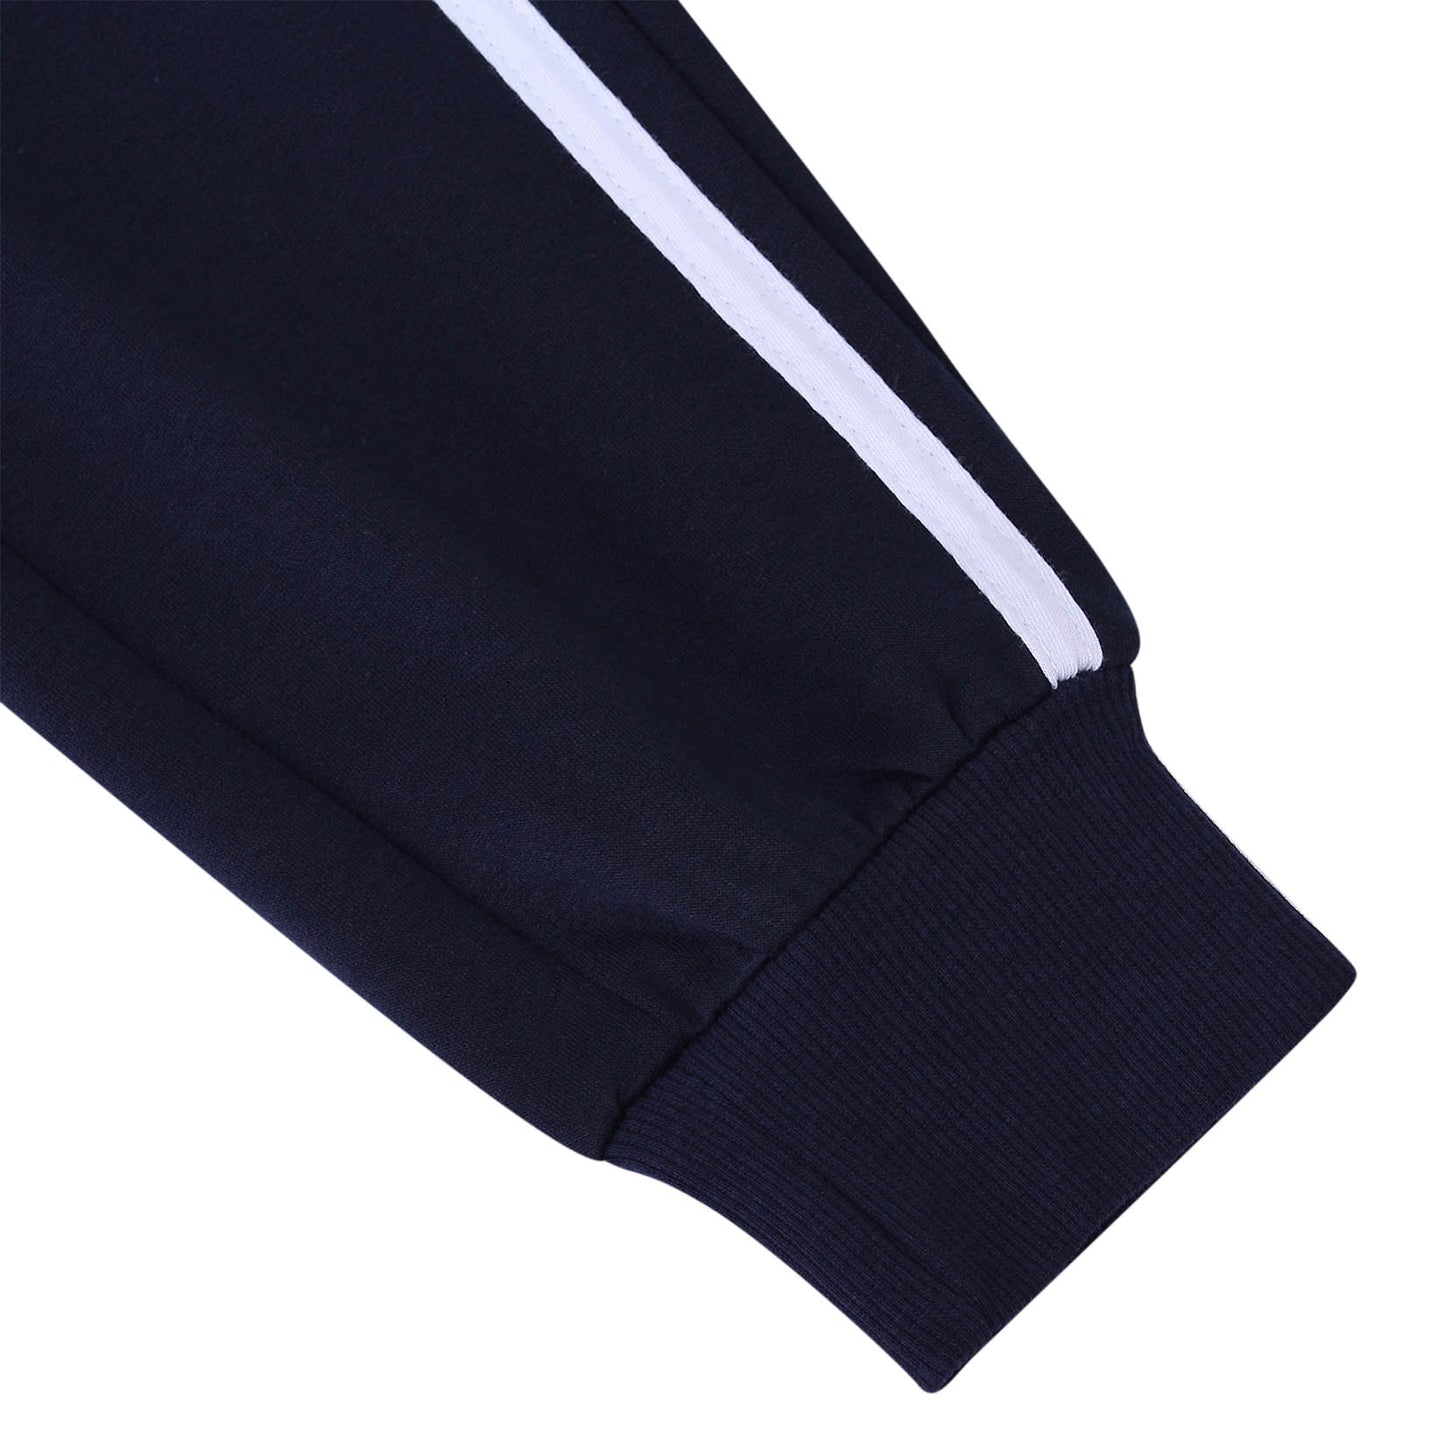 YESFASHION Women's Pockets Casual Sports Pants Navy Blue